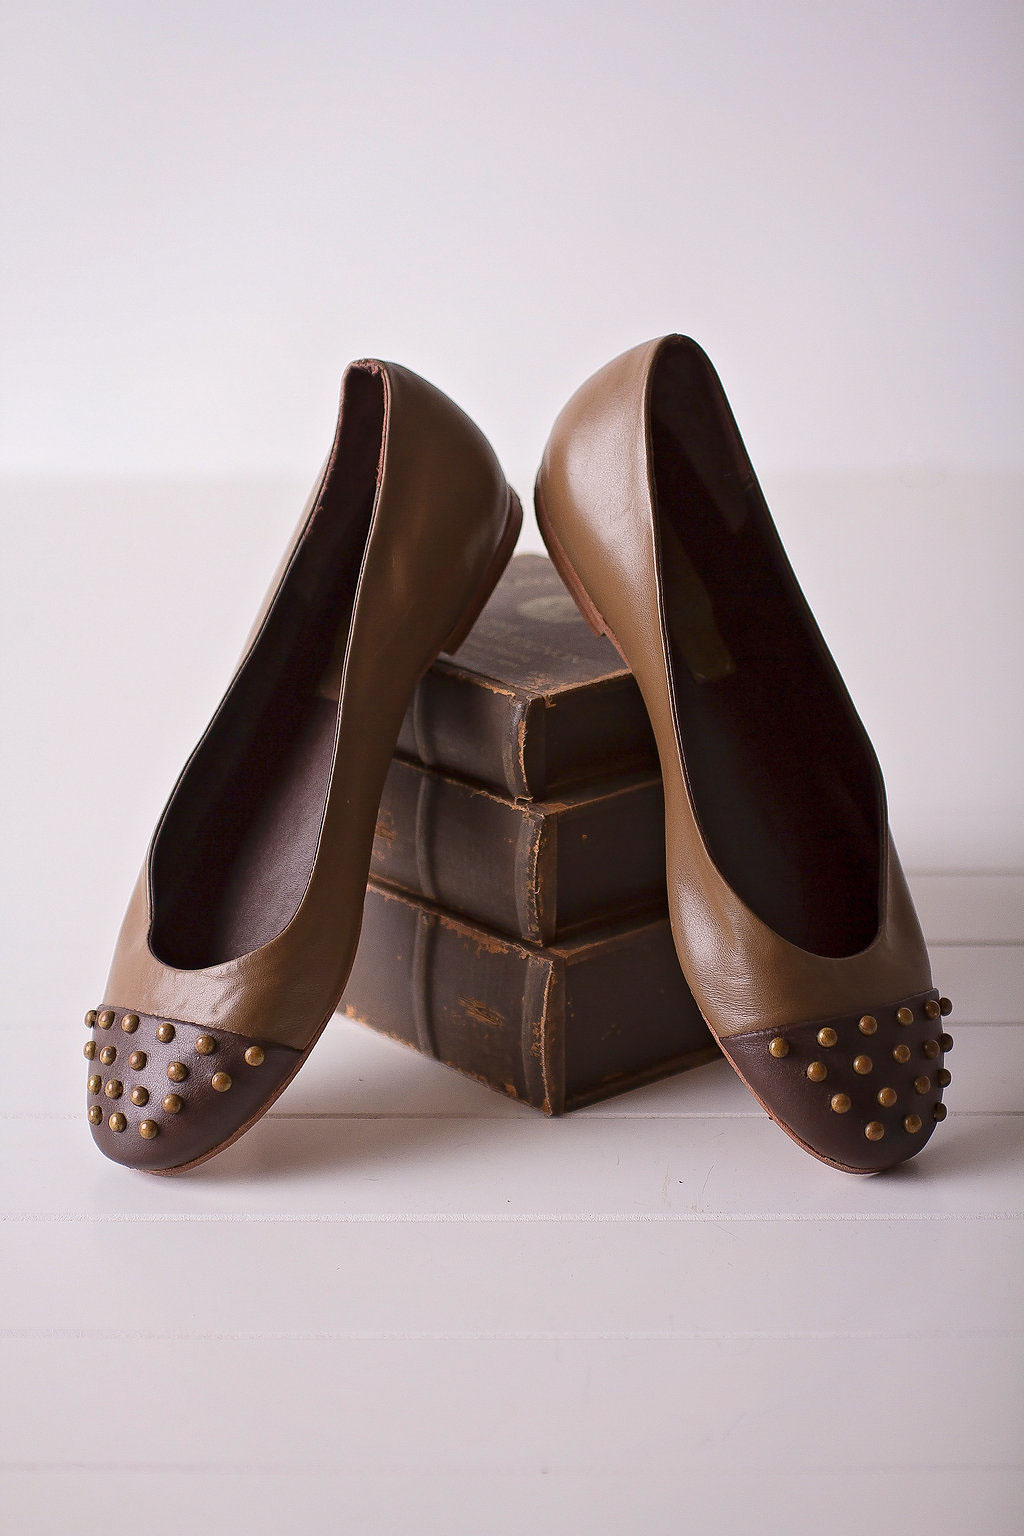 shoes footwear shoe handmade leather studs stitching